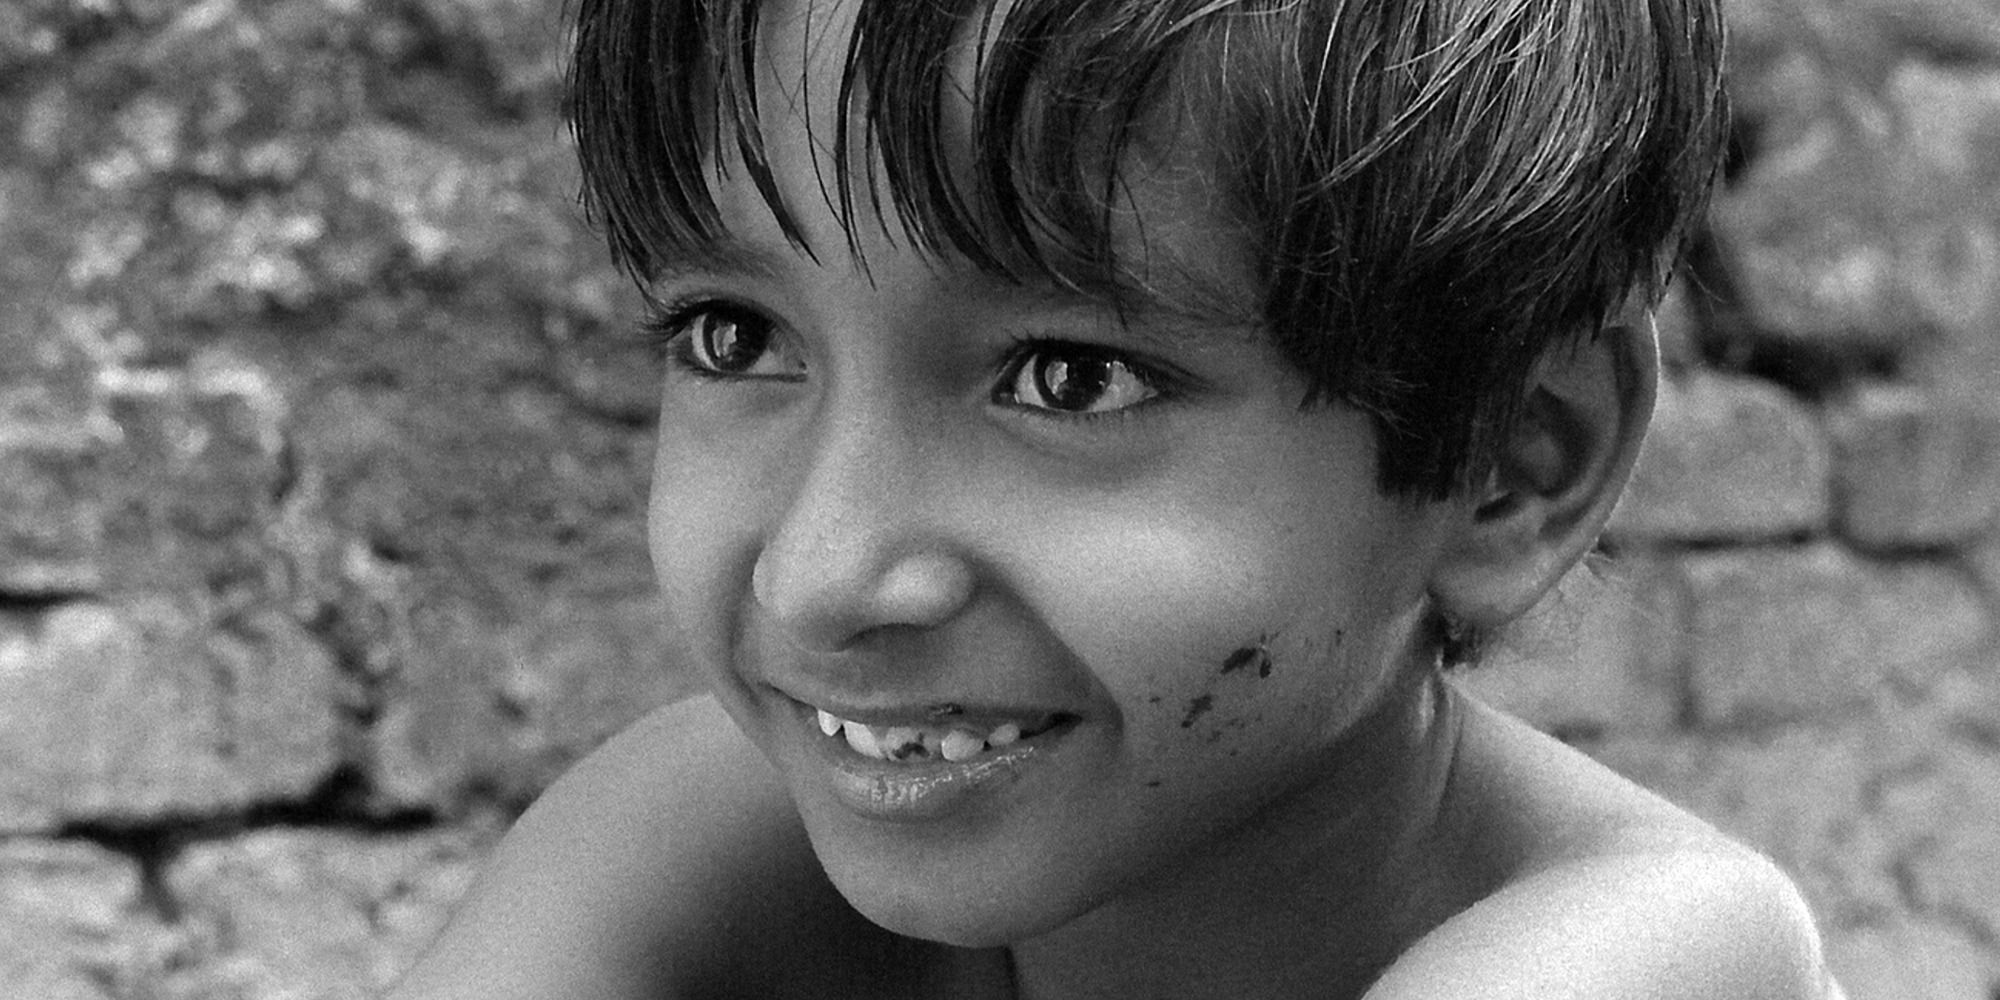 Subir Banerjee in 'Pather Panchali' looking over the camera